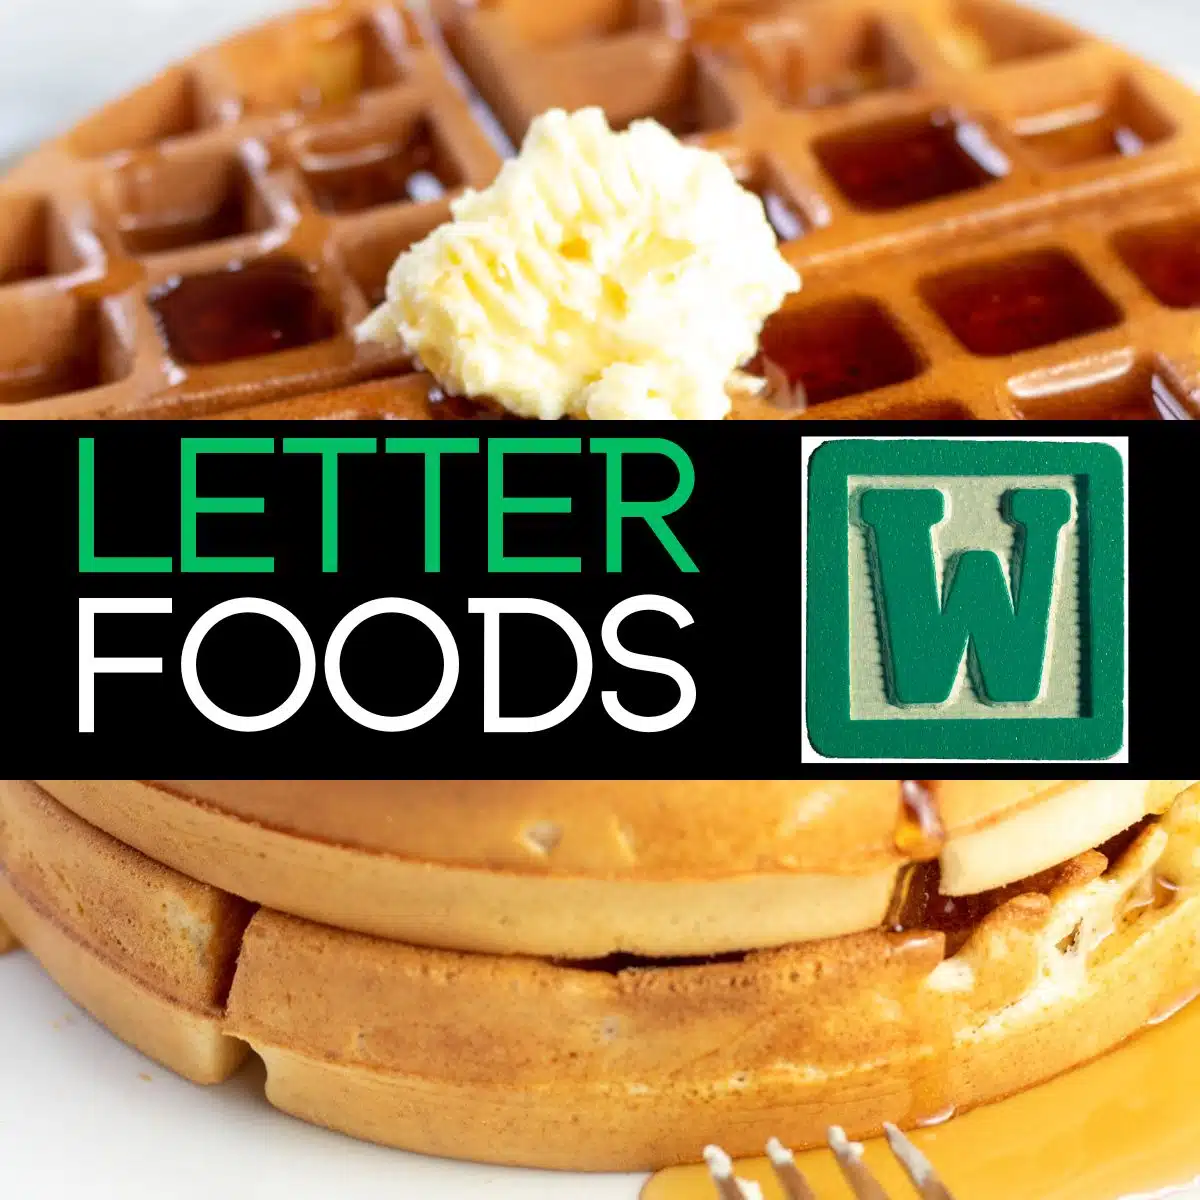 Square image with text for foods that start with the letter w, featuring waffles in photo.